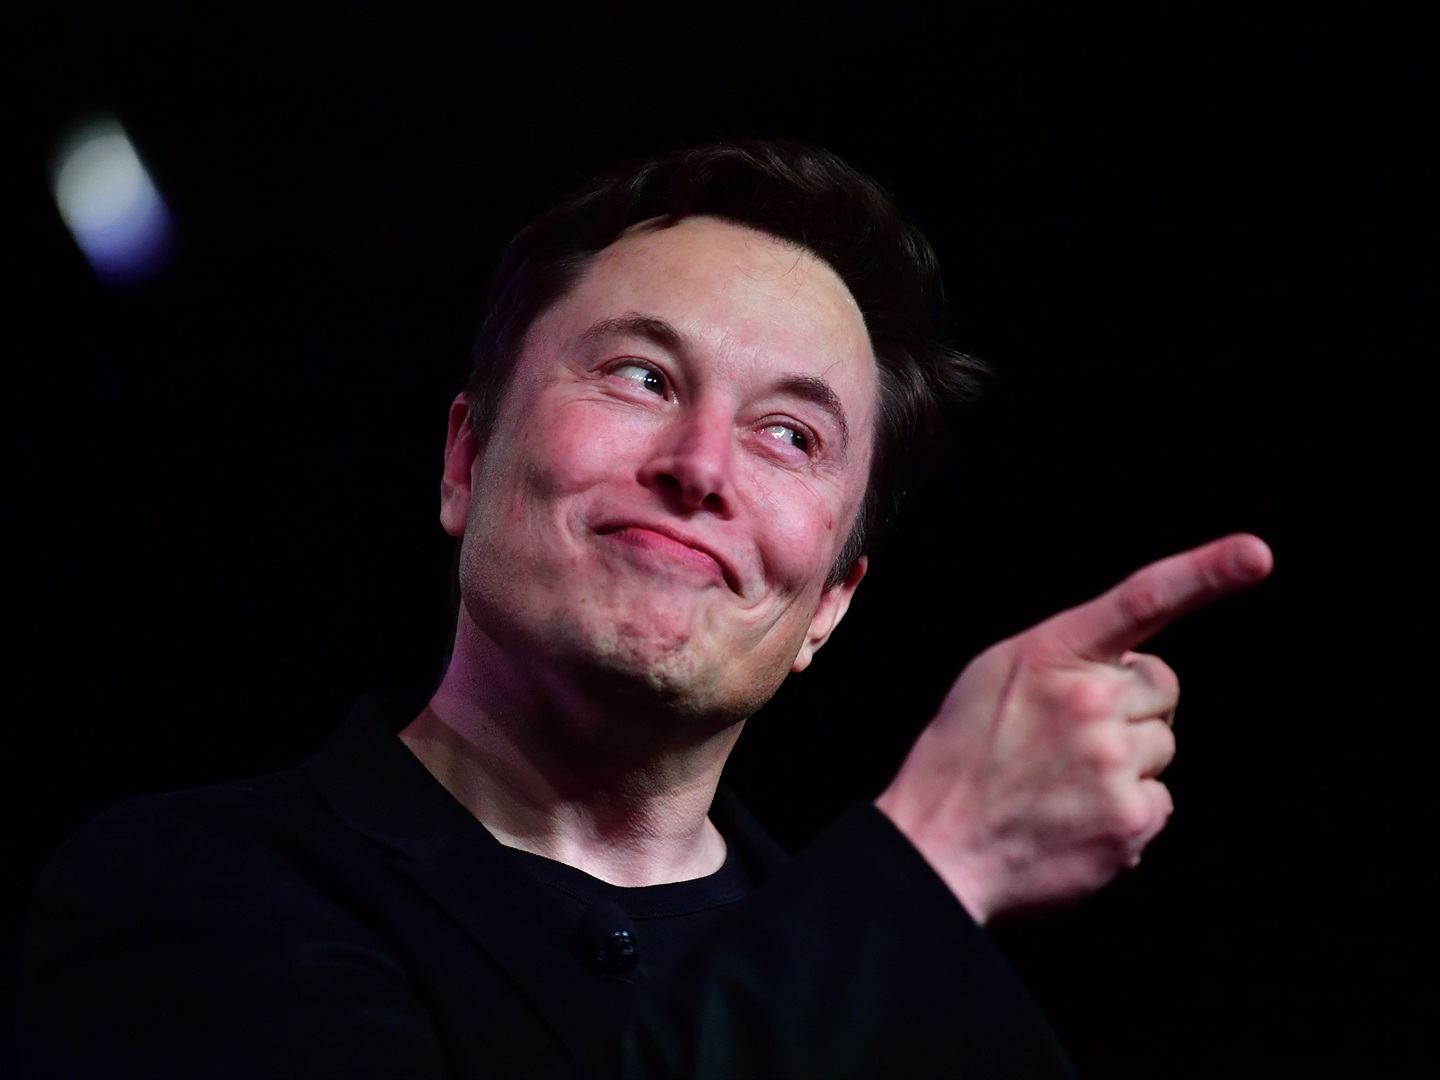 Musk has formed an X.AI artificial intelligence corporation based in the US state of Nevada, according to business documents.  